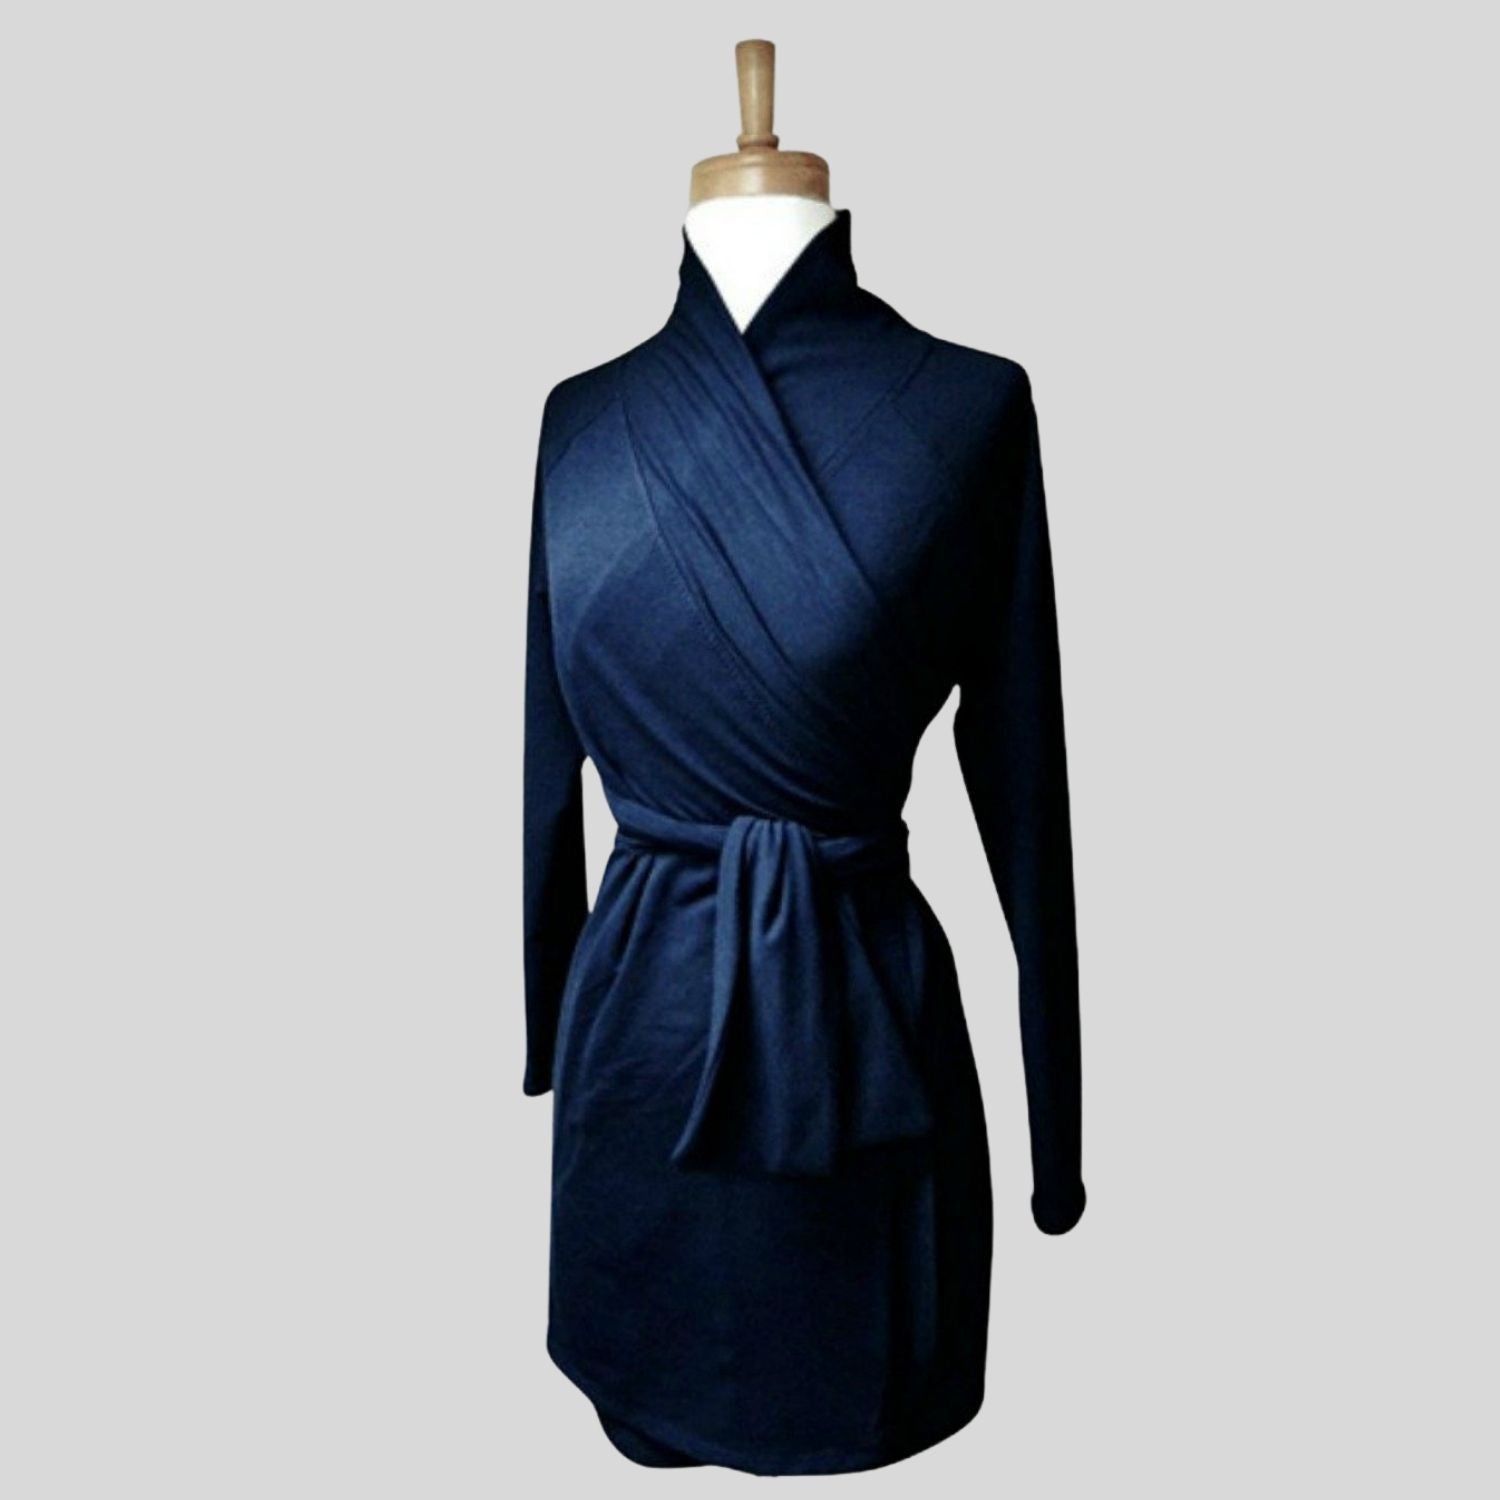 Shop short wrap dresses from Canada | Made in Canada organic cotton dresses for women | Econica 